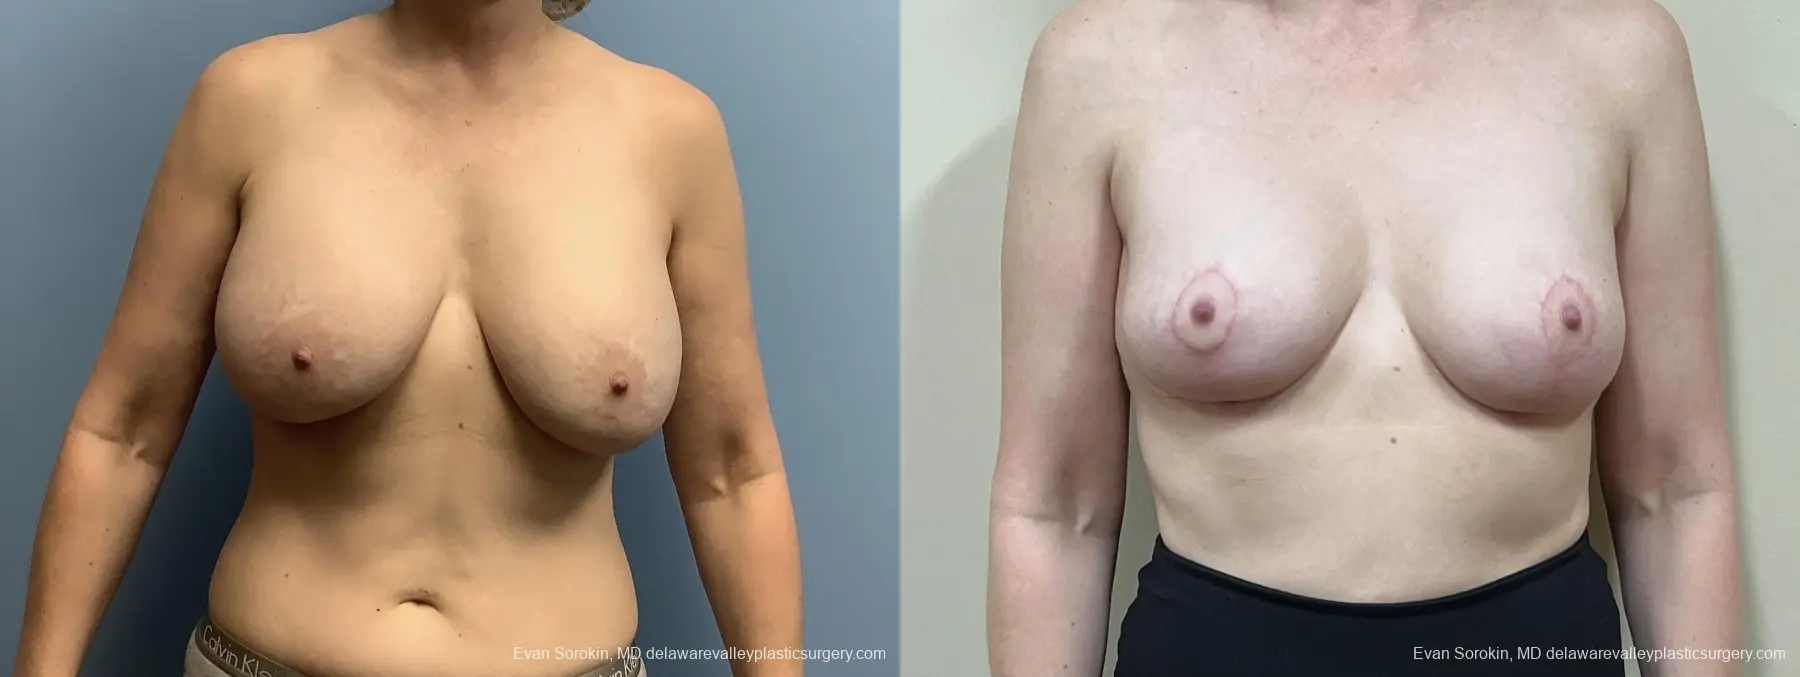 Breast Reduction: Patient 9 - Before and After 1